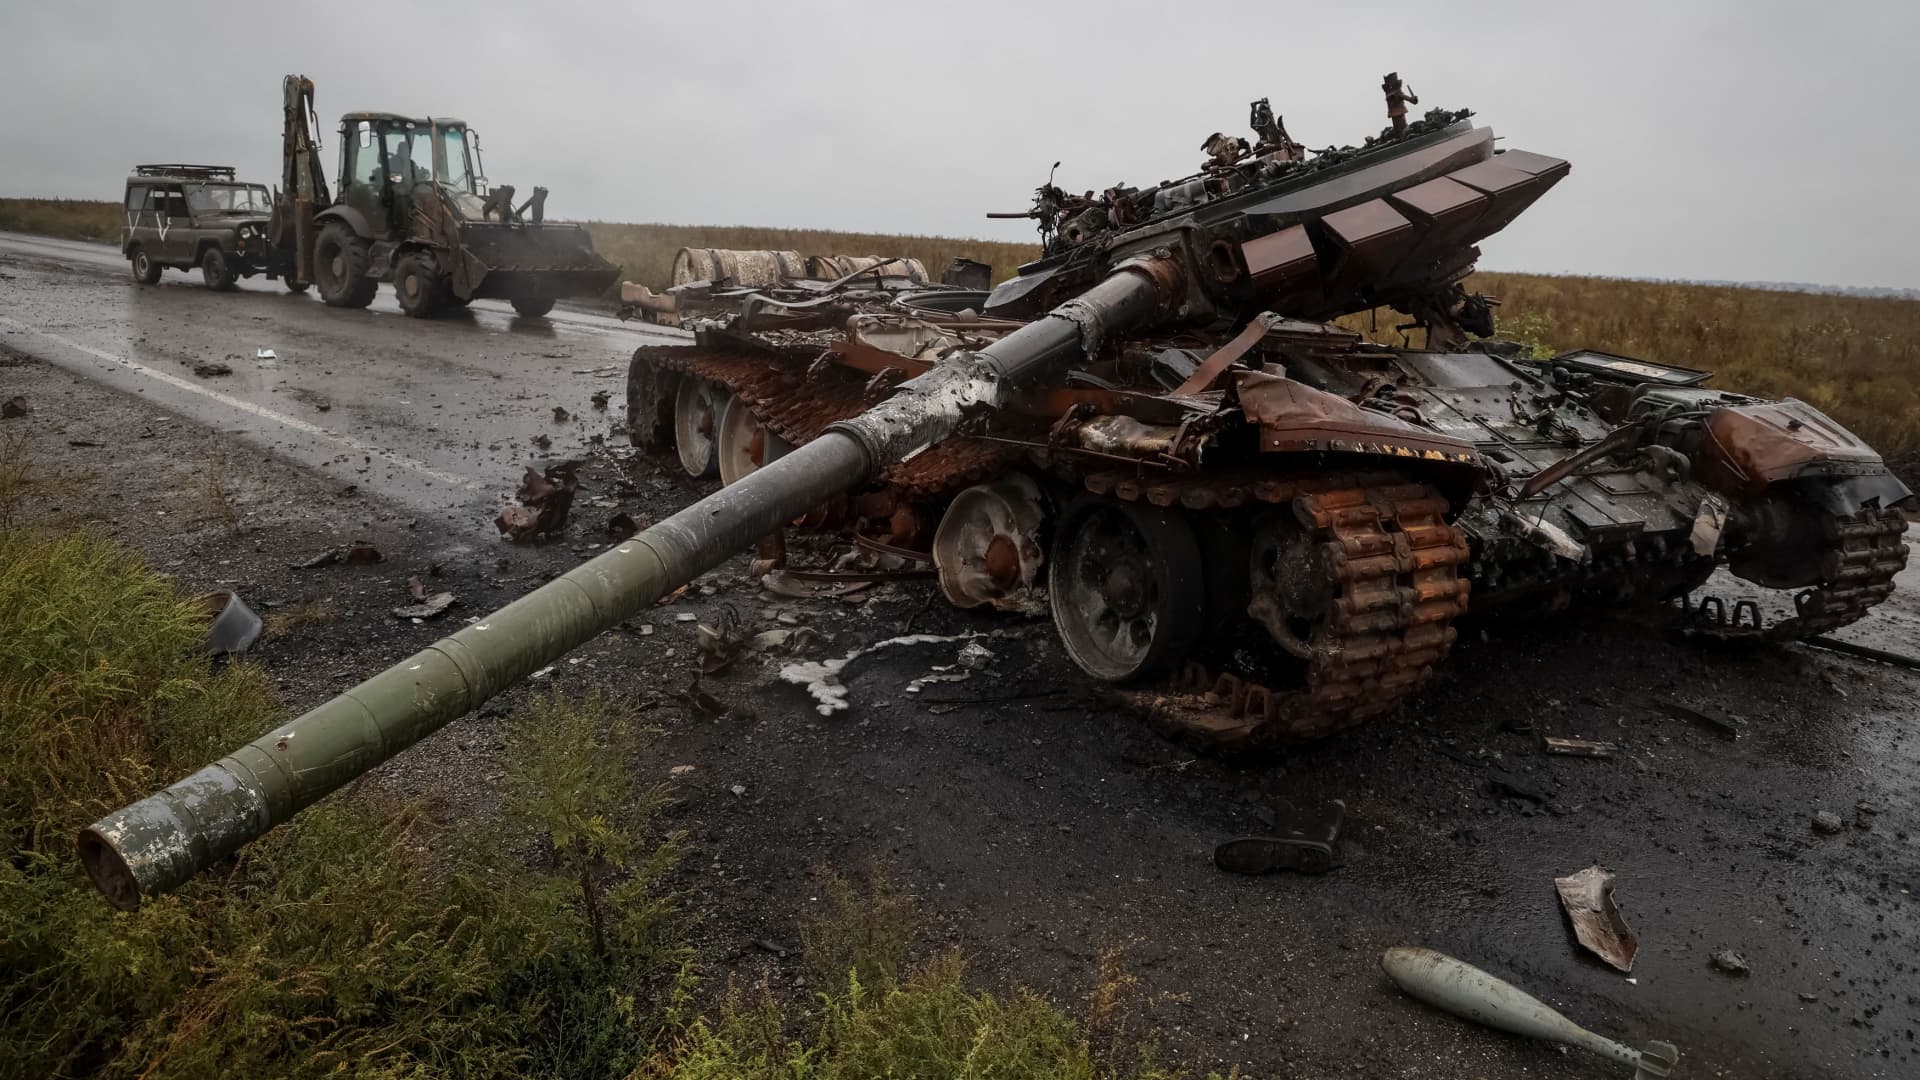 A destroyed Russian tank is seen as Ukrainian serviceman rides a tractor and tows a Russian military vehicle, amid Russia's invasion on Ukraine, near the village of Dolyna in Kharkiv region, Ukraine September 23, 2022.